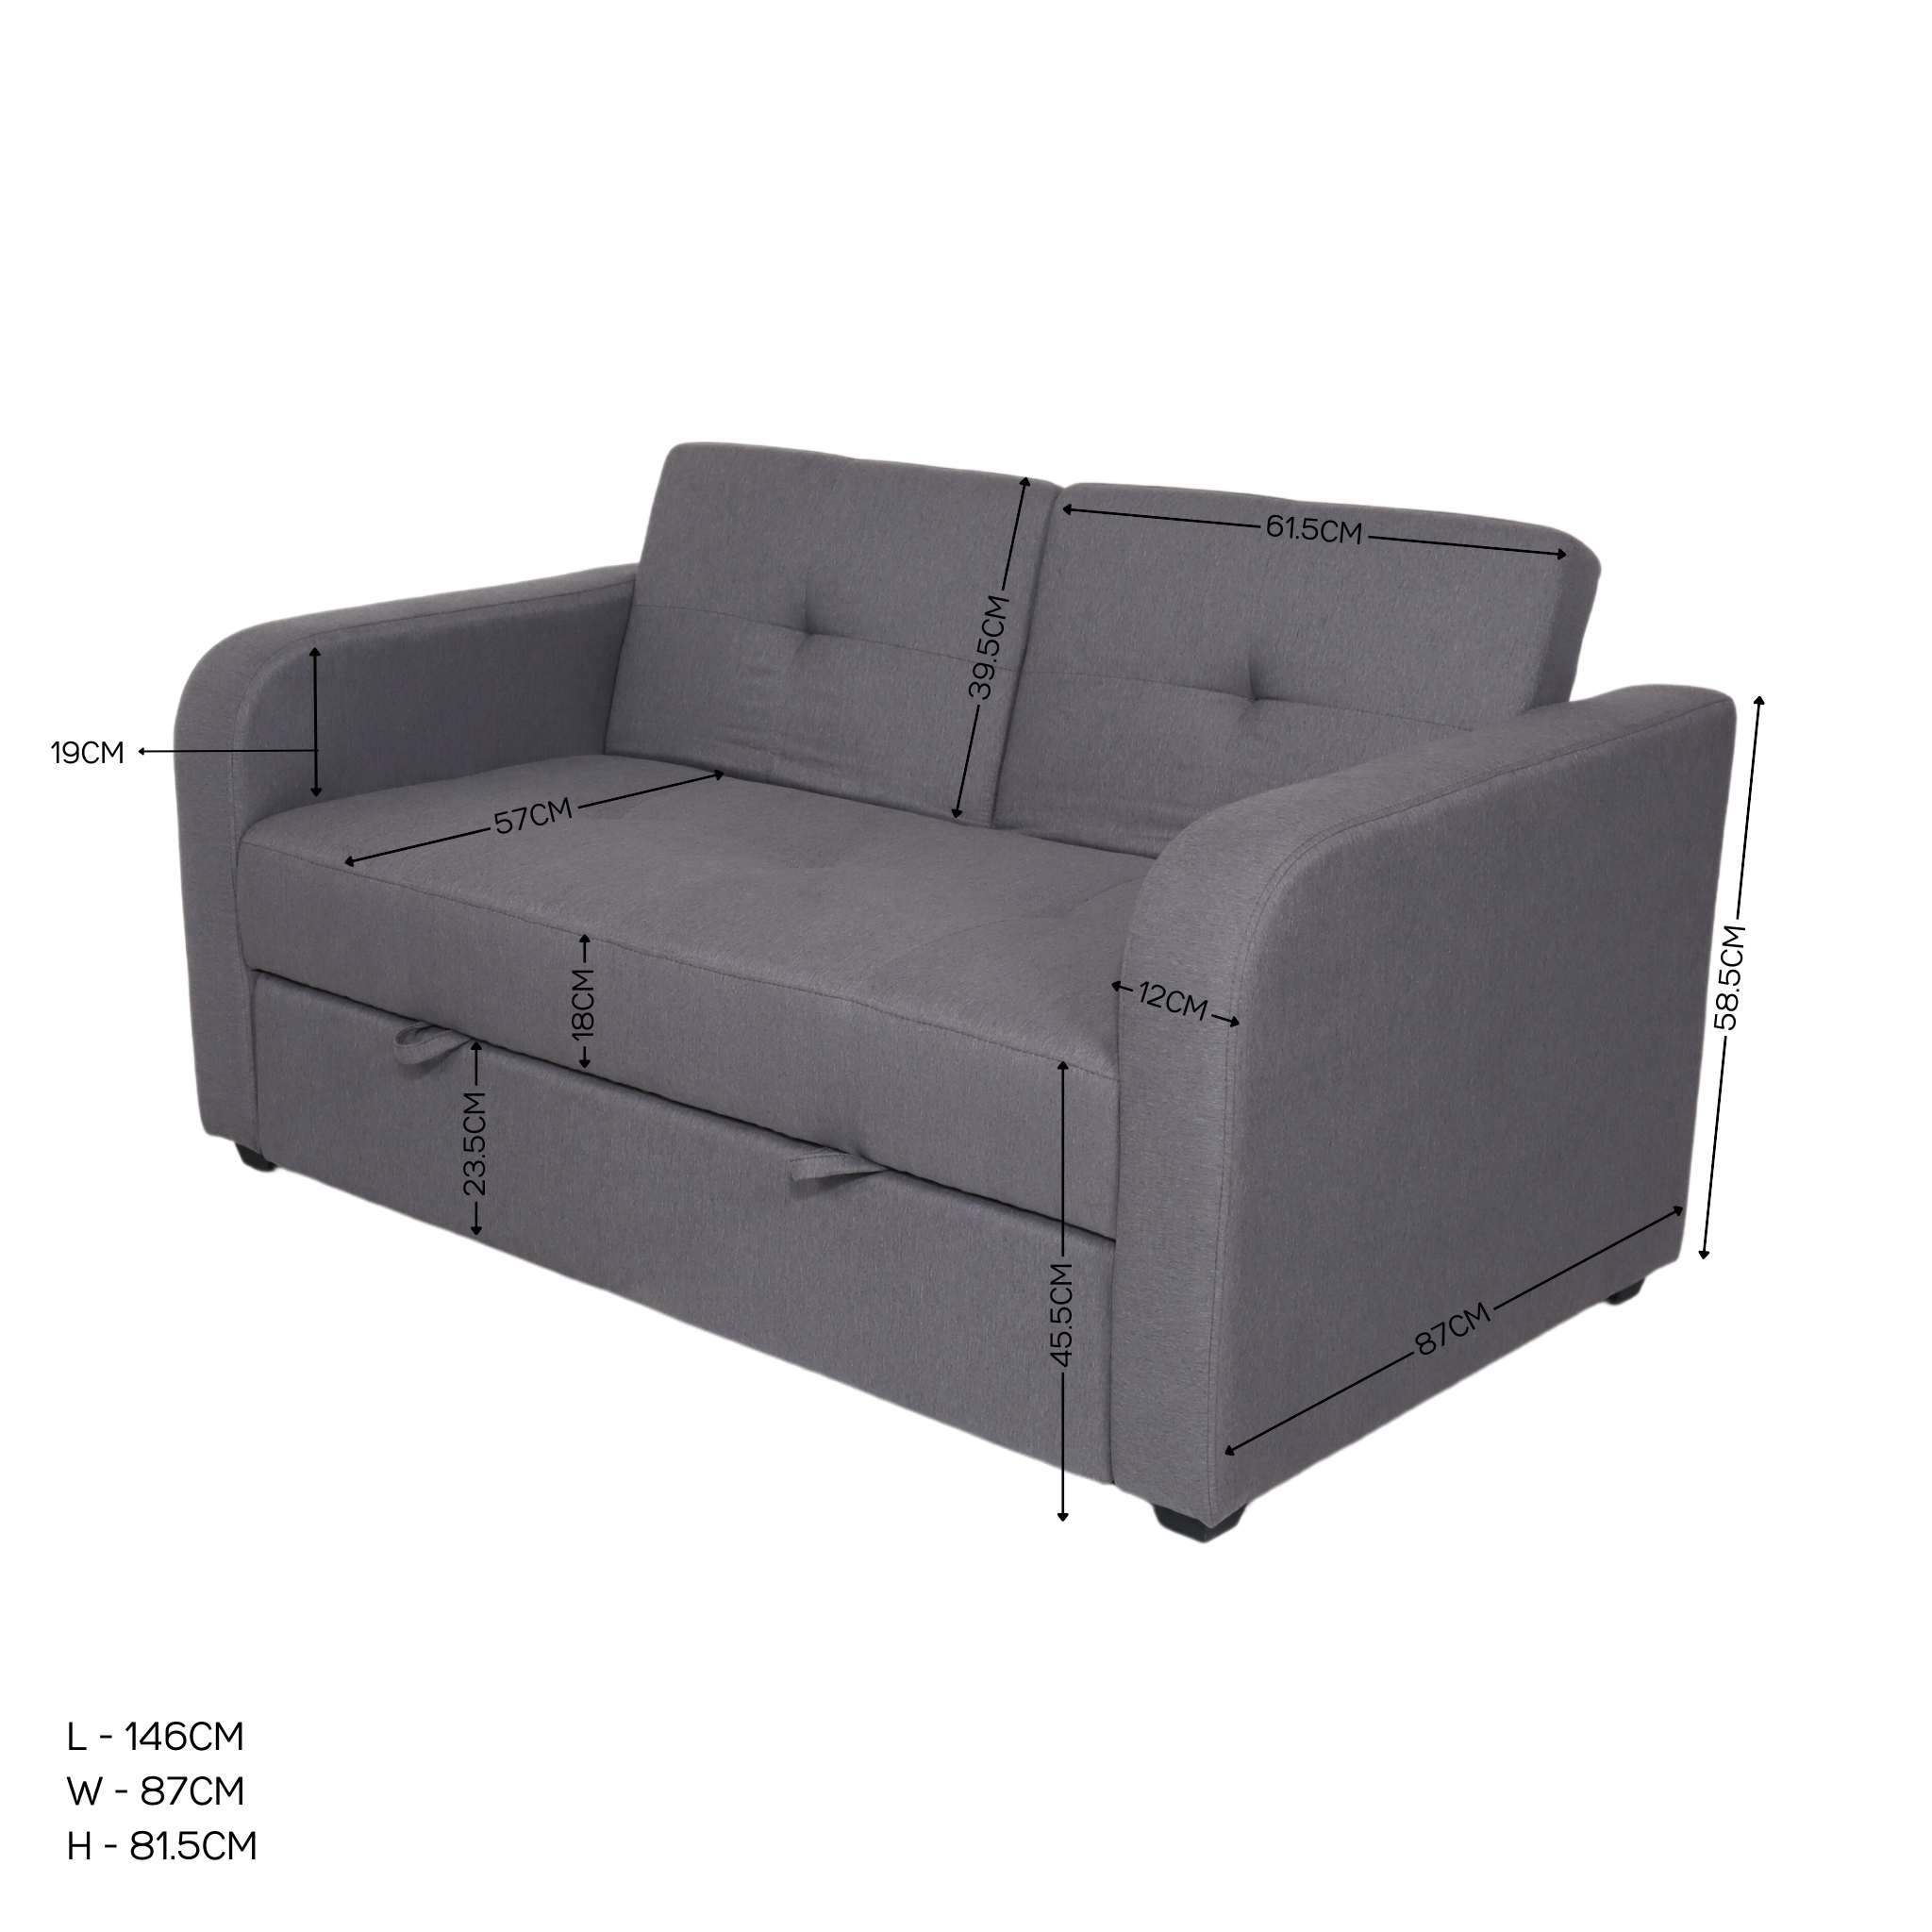 SKY Pullout Fabric Sofa Bed AF Home